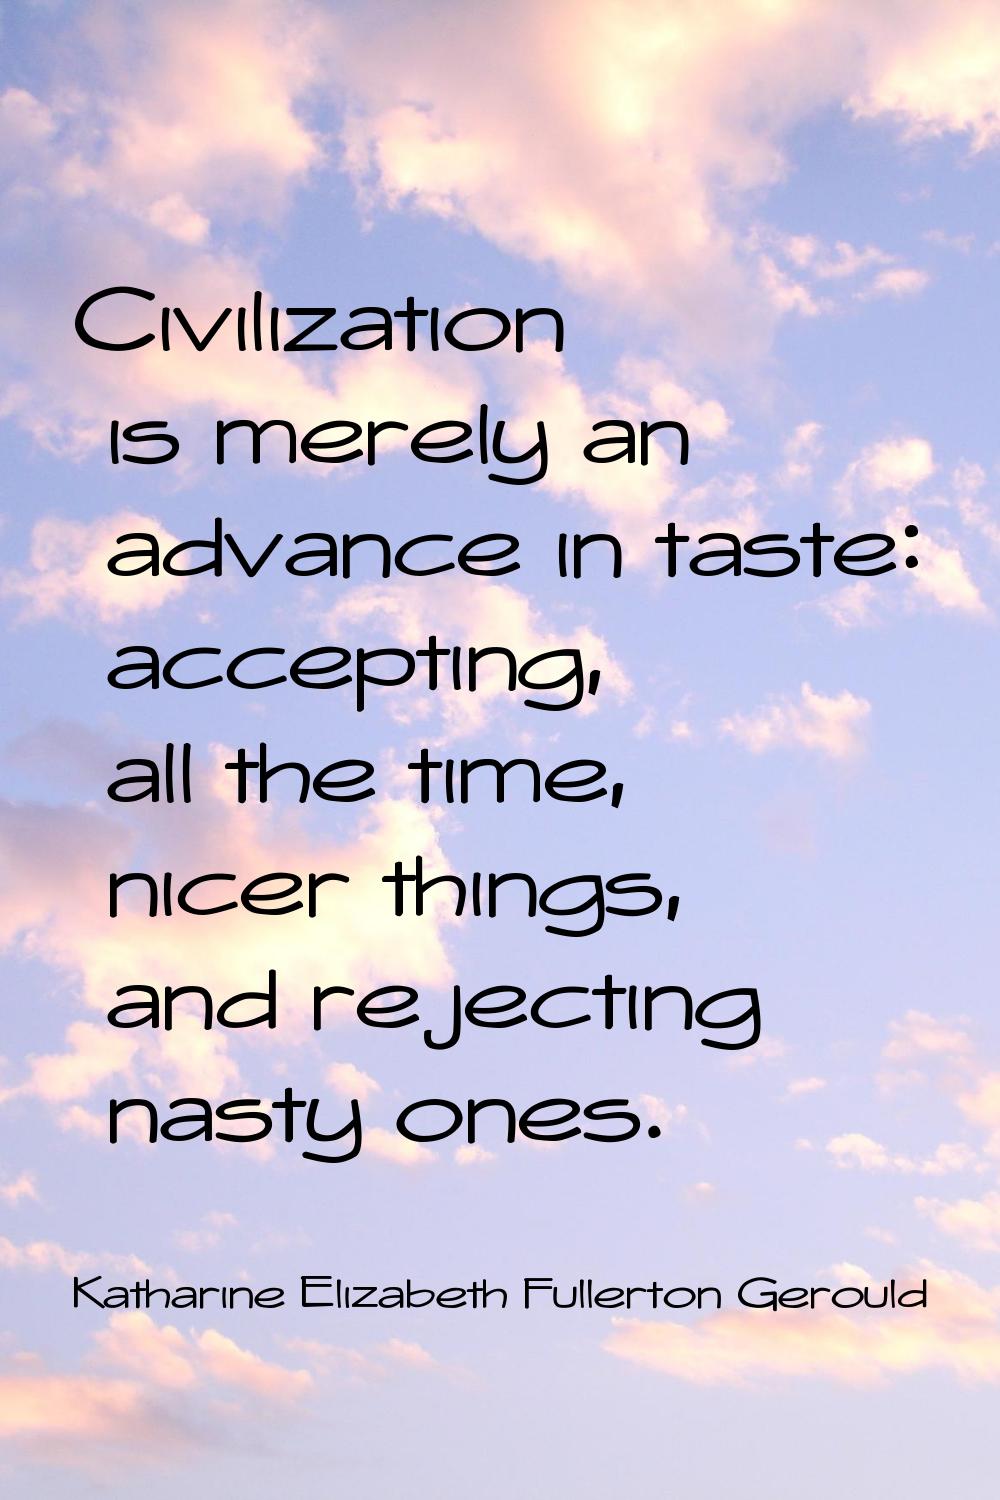 Civilization is merely an advance in taste: accepting, all the time, nicer things, and rejecting na